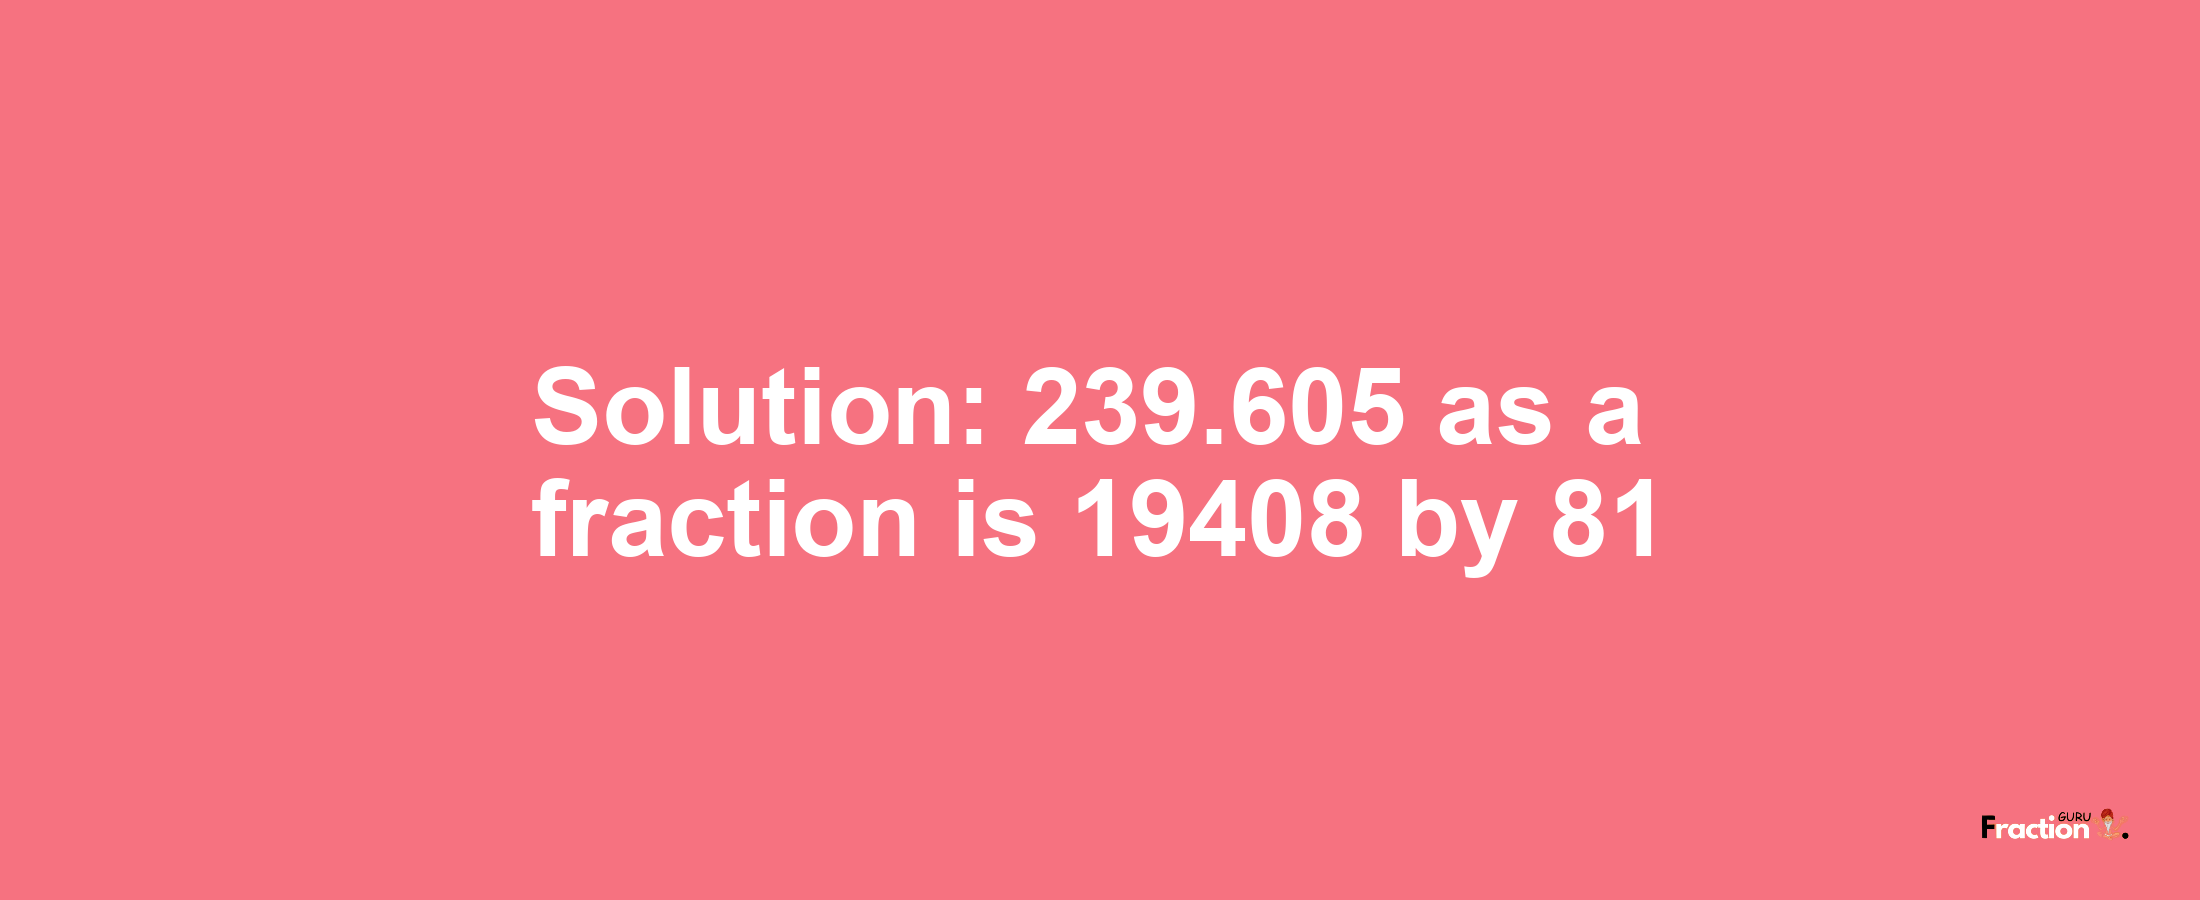 Solution:239.605 as a fraction is 19408/81